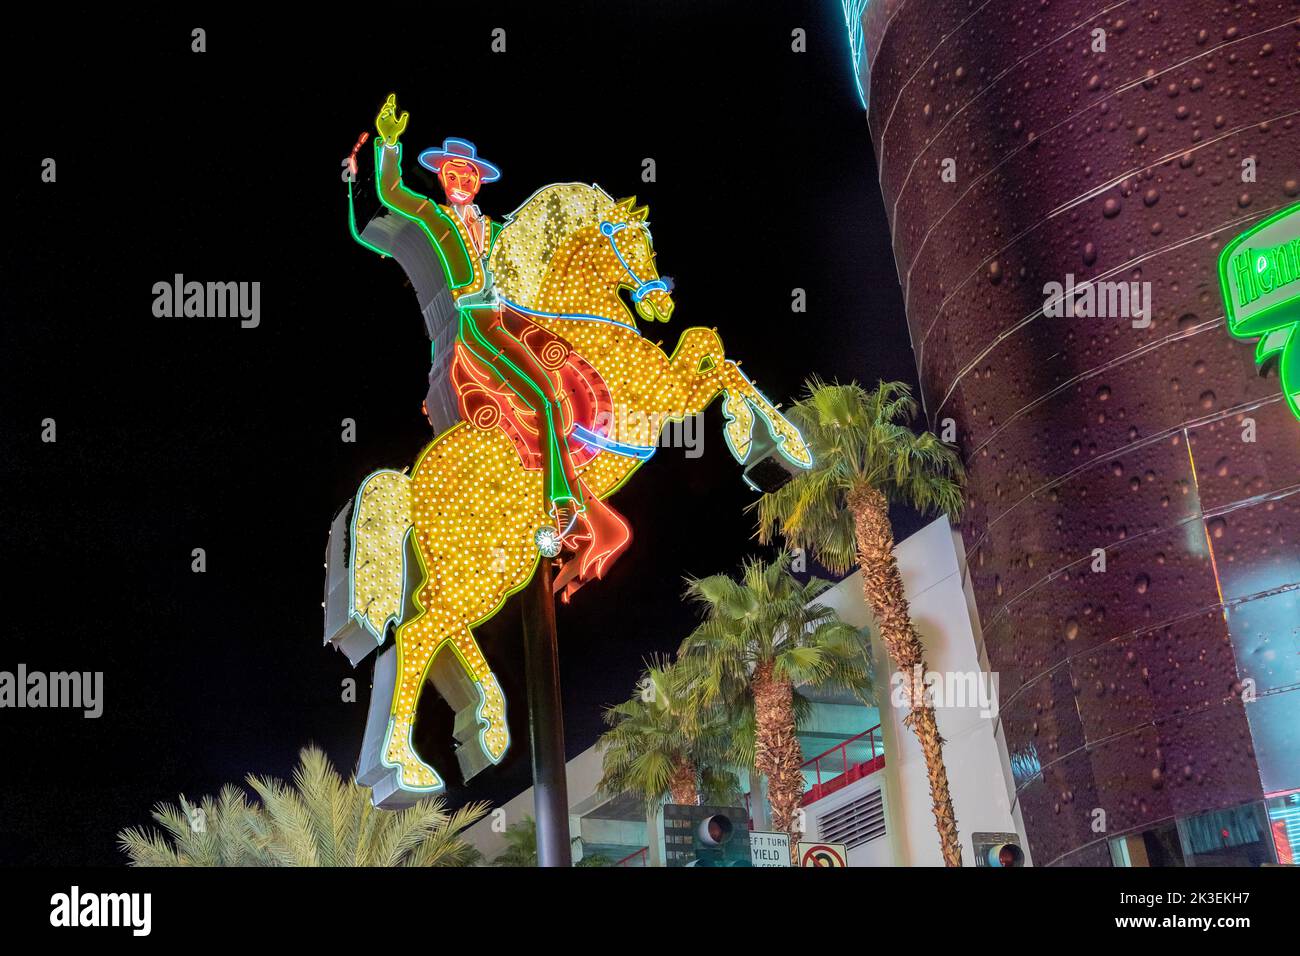 Las Vegas, USA - March 9, 2019: view to cowboy Vic in the Fremont street by night, illuminated by light bulbs in Las Vegas, USA. Stock Photo